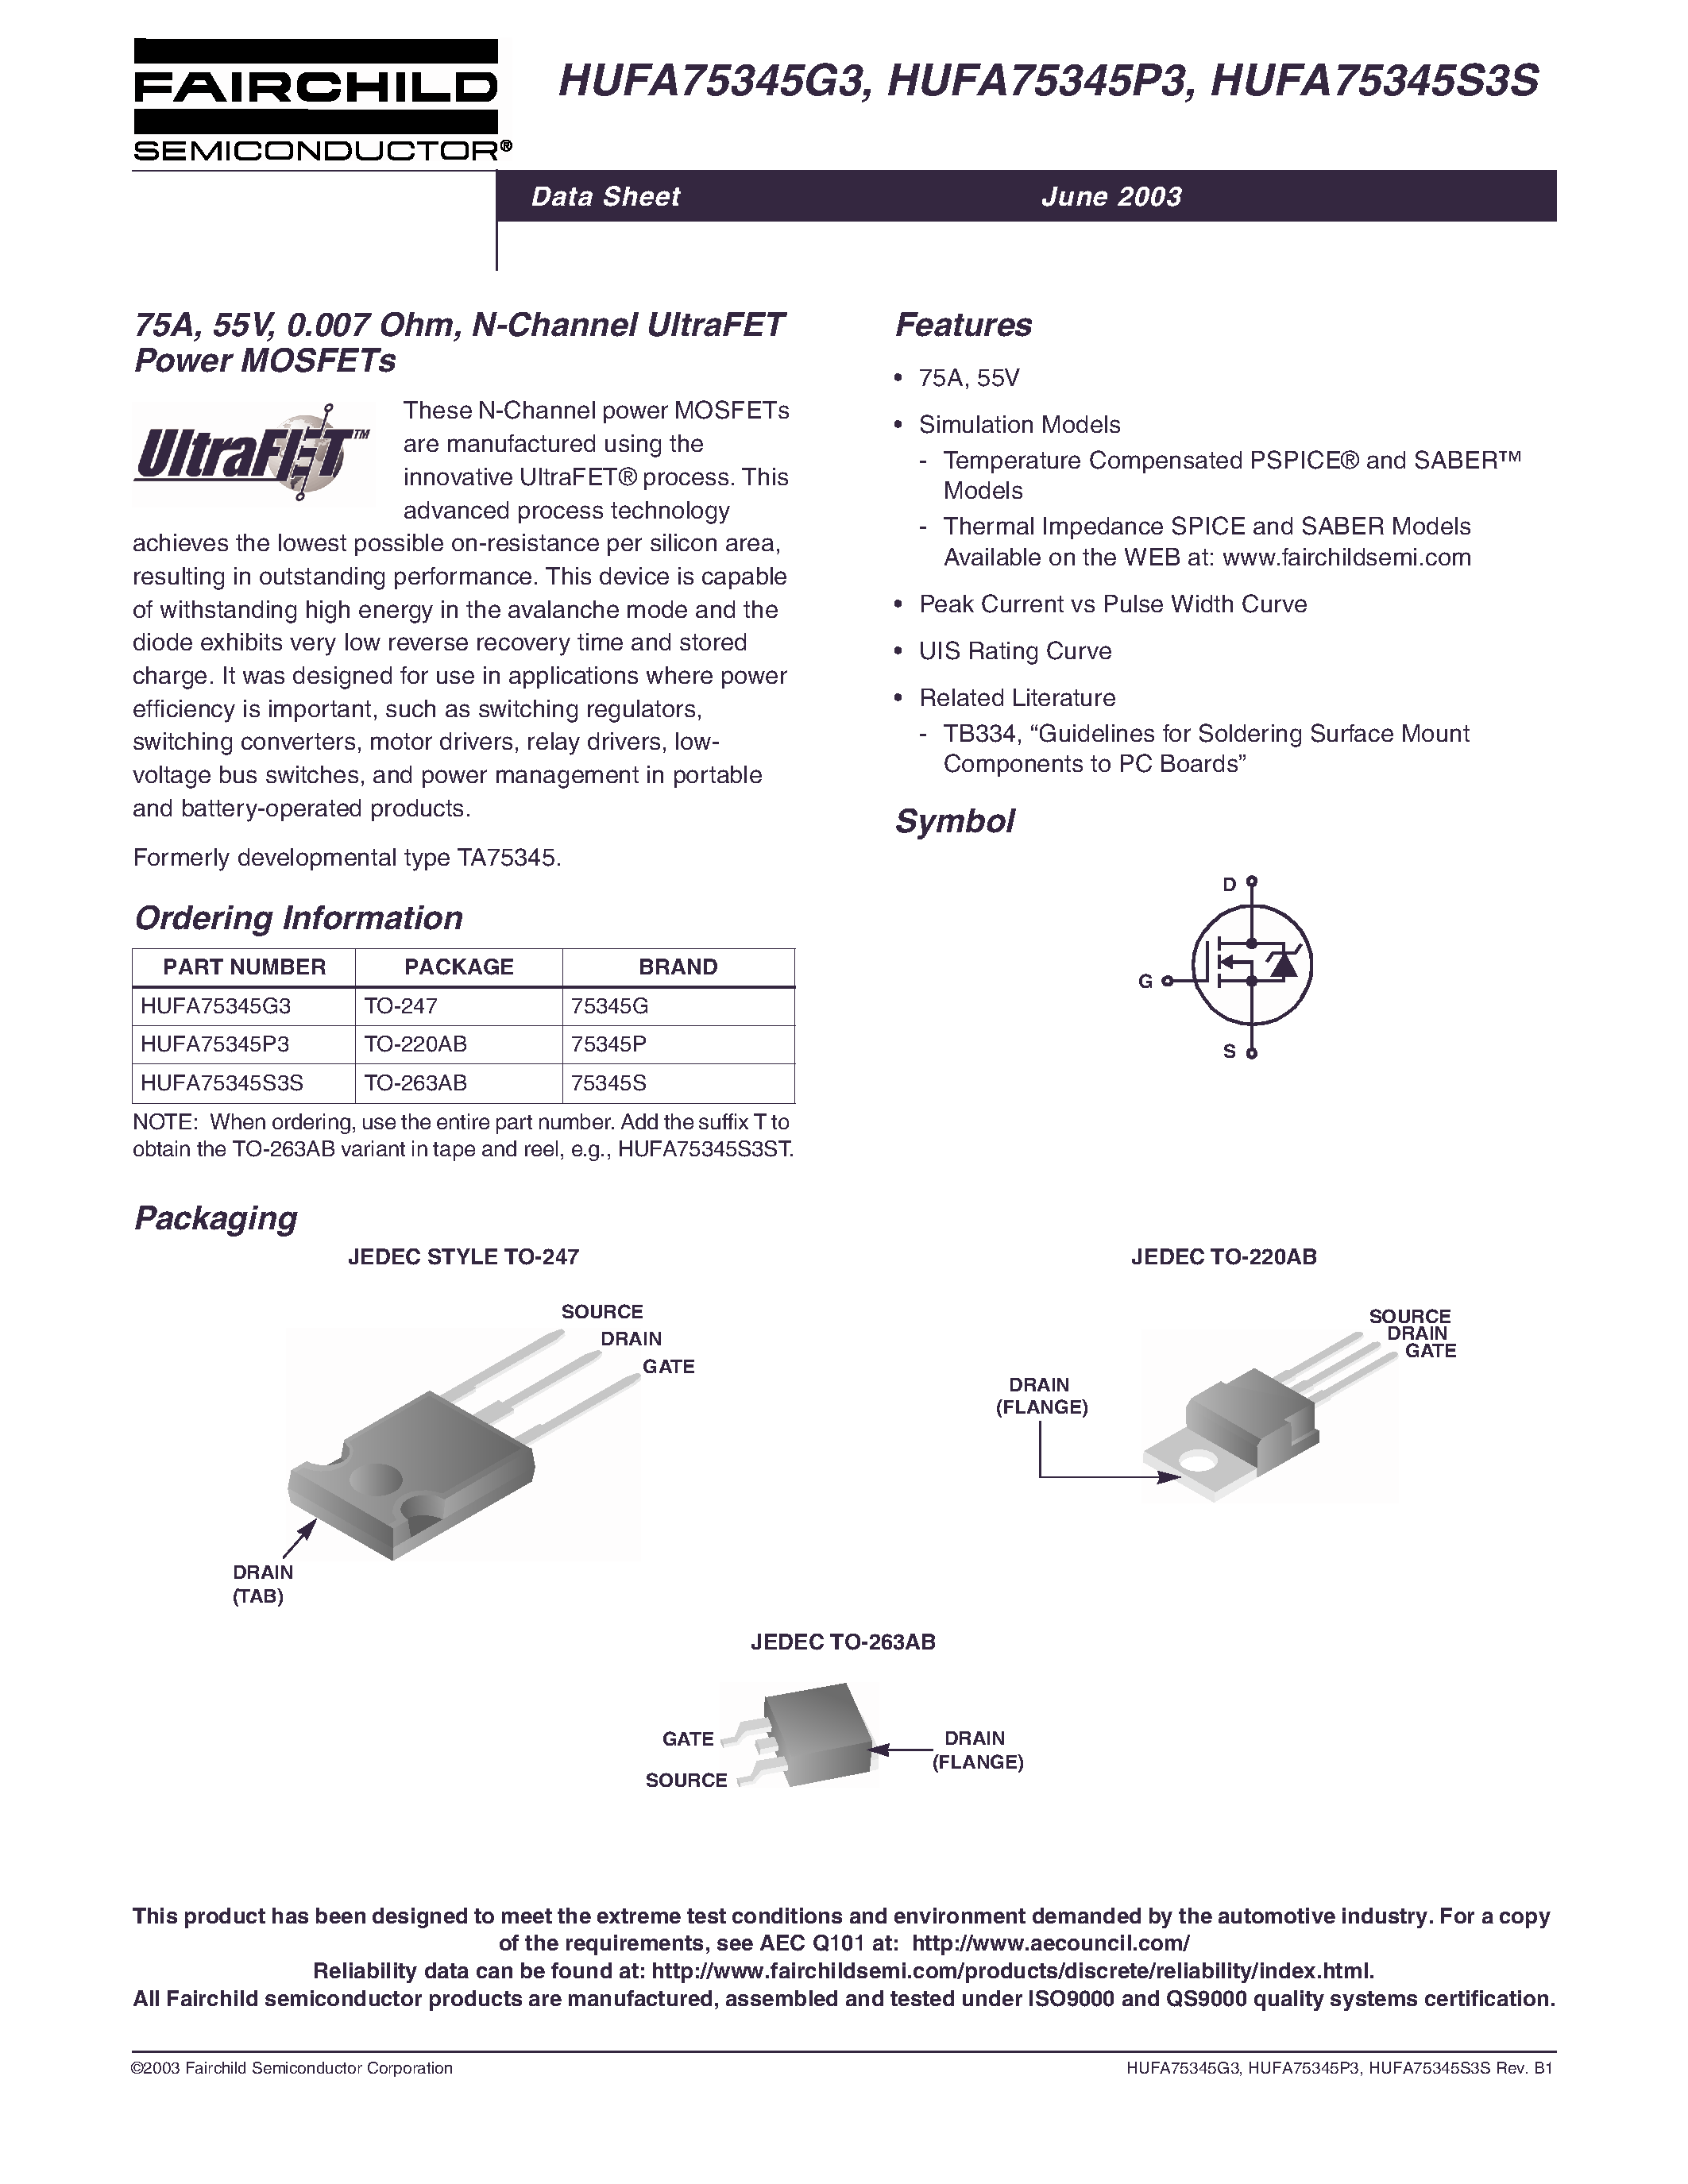 Datasheet HUFA75345S3S - 75A/ 55V/ 0.007 Ohm/ N-Channel UltraFET Power MOSFETs page 1